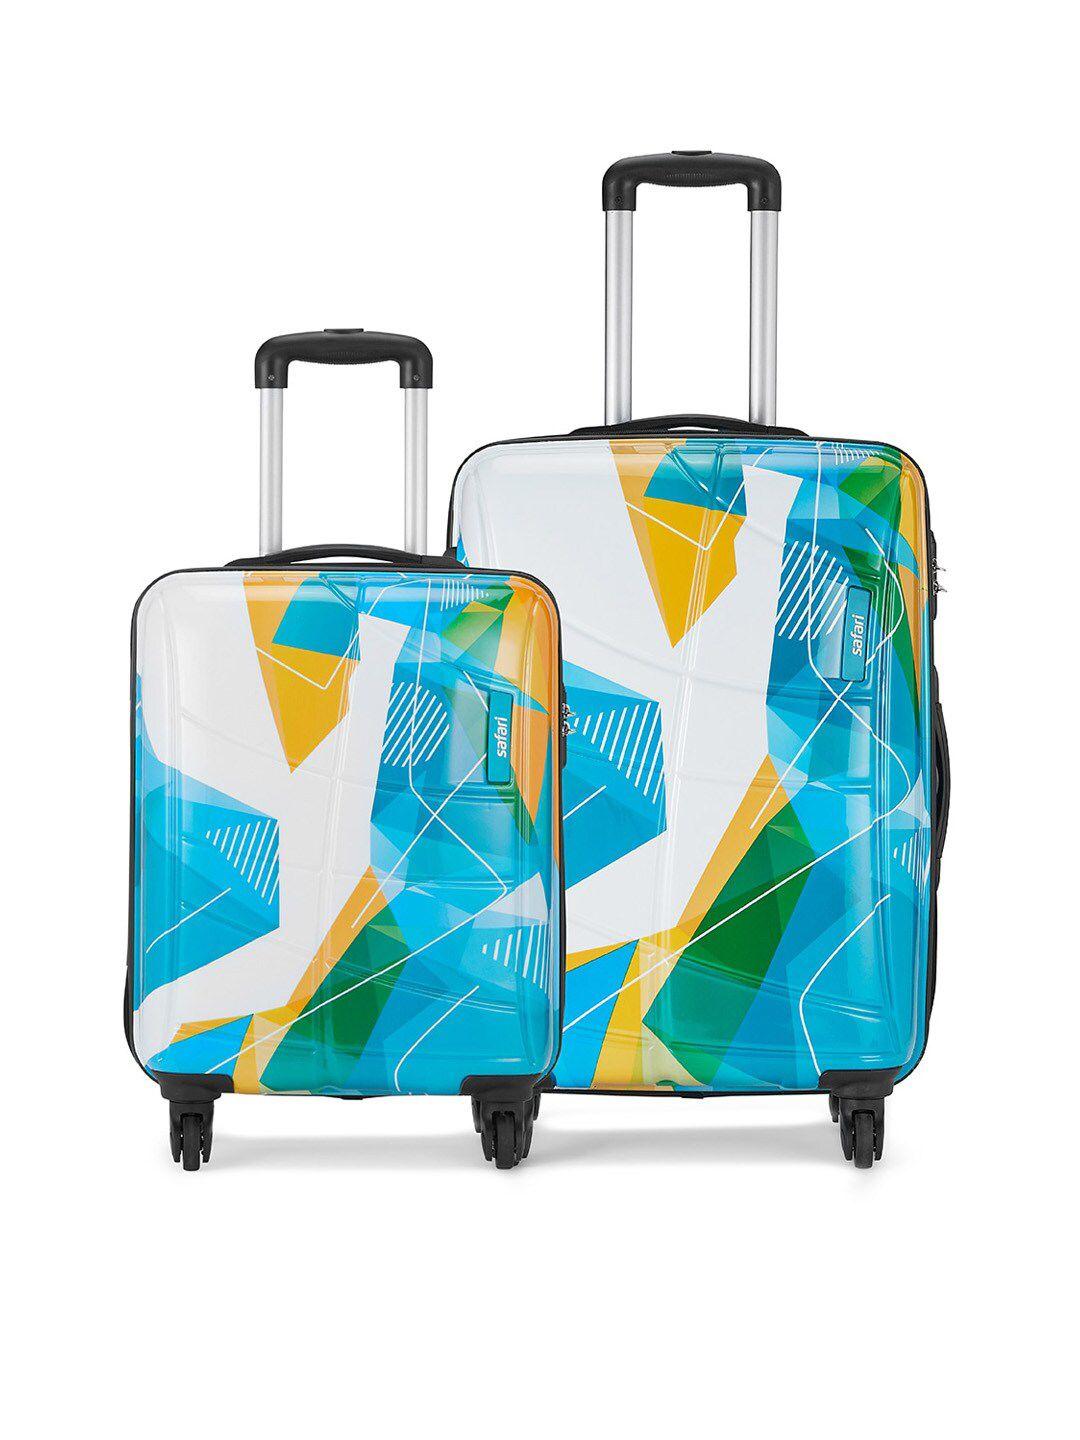 safari-set-of-2-blue-printed-hard-sided-trolley-suitcases